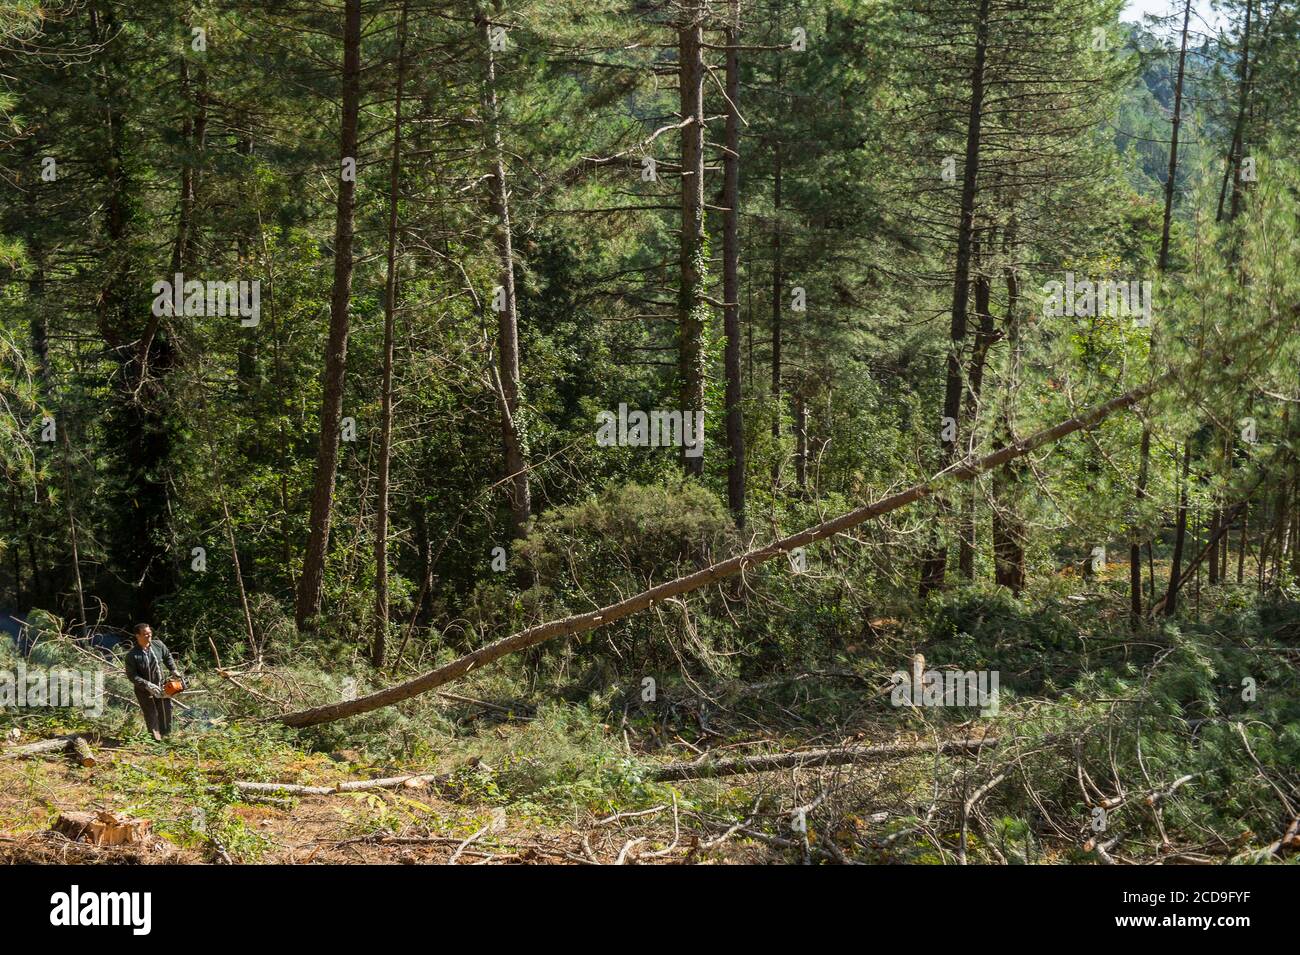 France, Haute Corse, Vivario, in the forest of Verghello, slaughter of conifers by a logger to rehabilitate an old chestnut tree Stock Photo